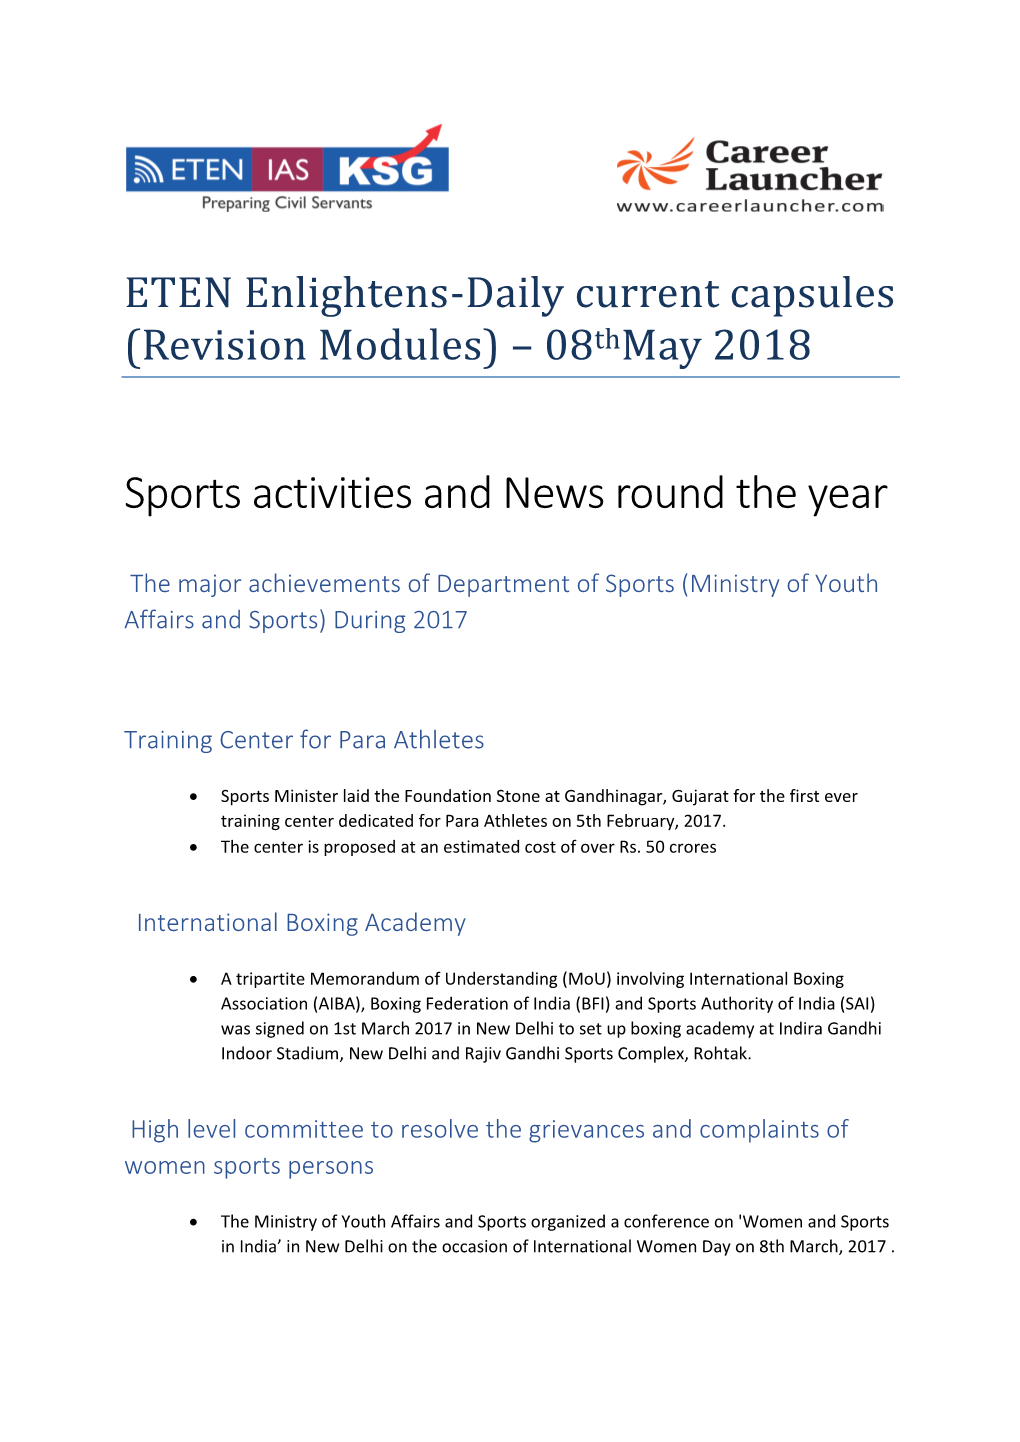 Sports Activities and News Round the Year